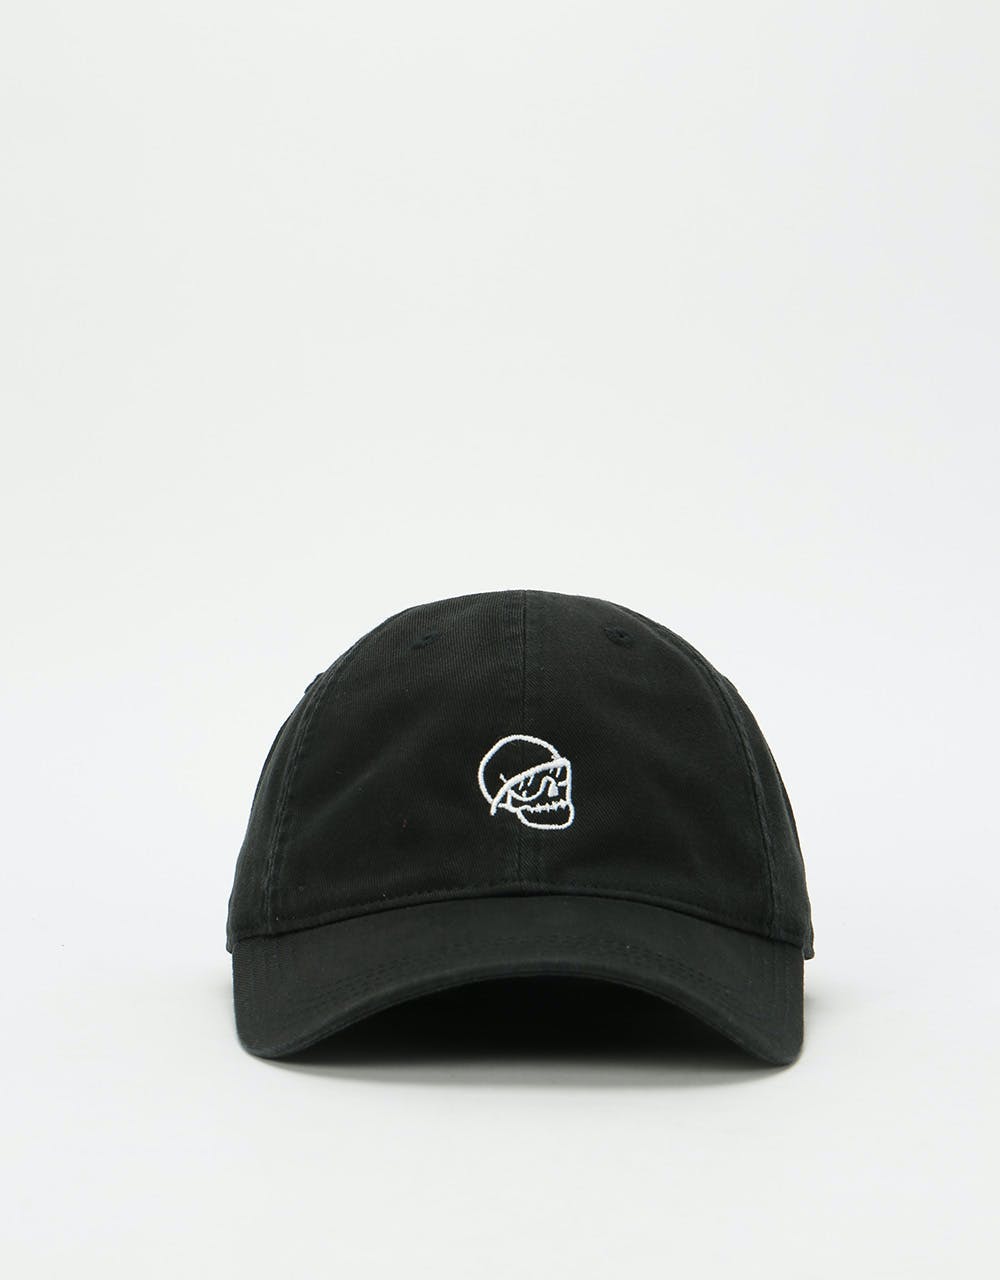 Route One Shade Cap - Black